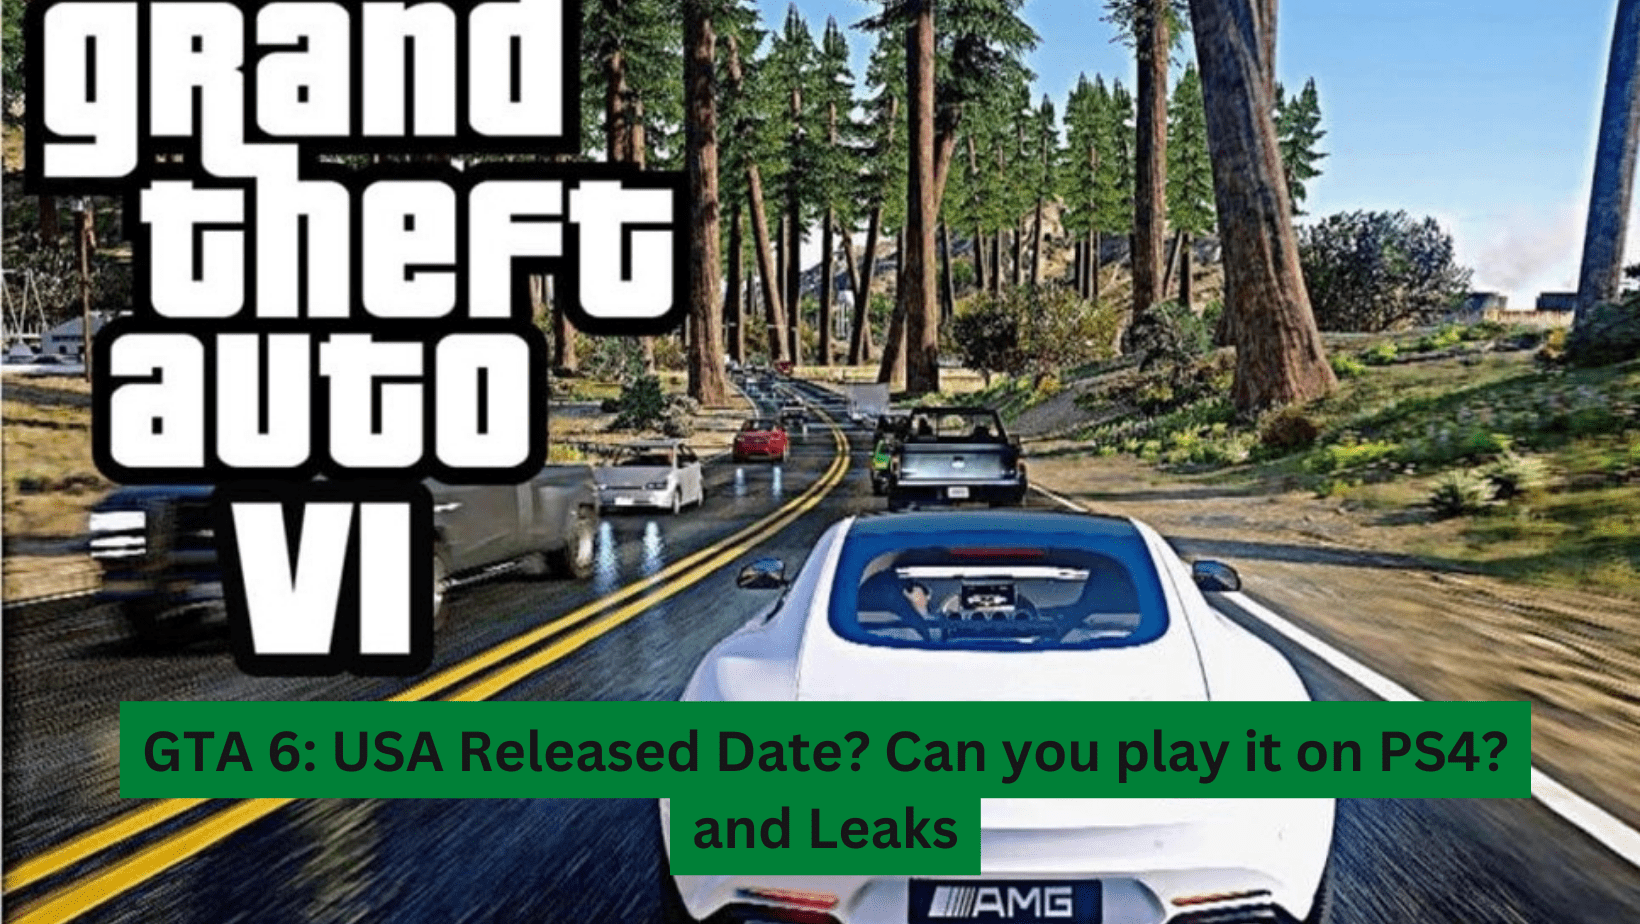 GTA VI: USA Released Date? Can you play it on PS4? and Leaks